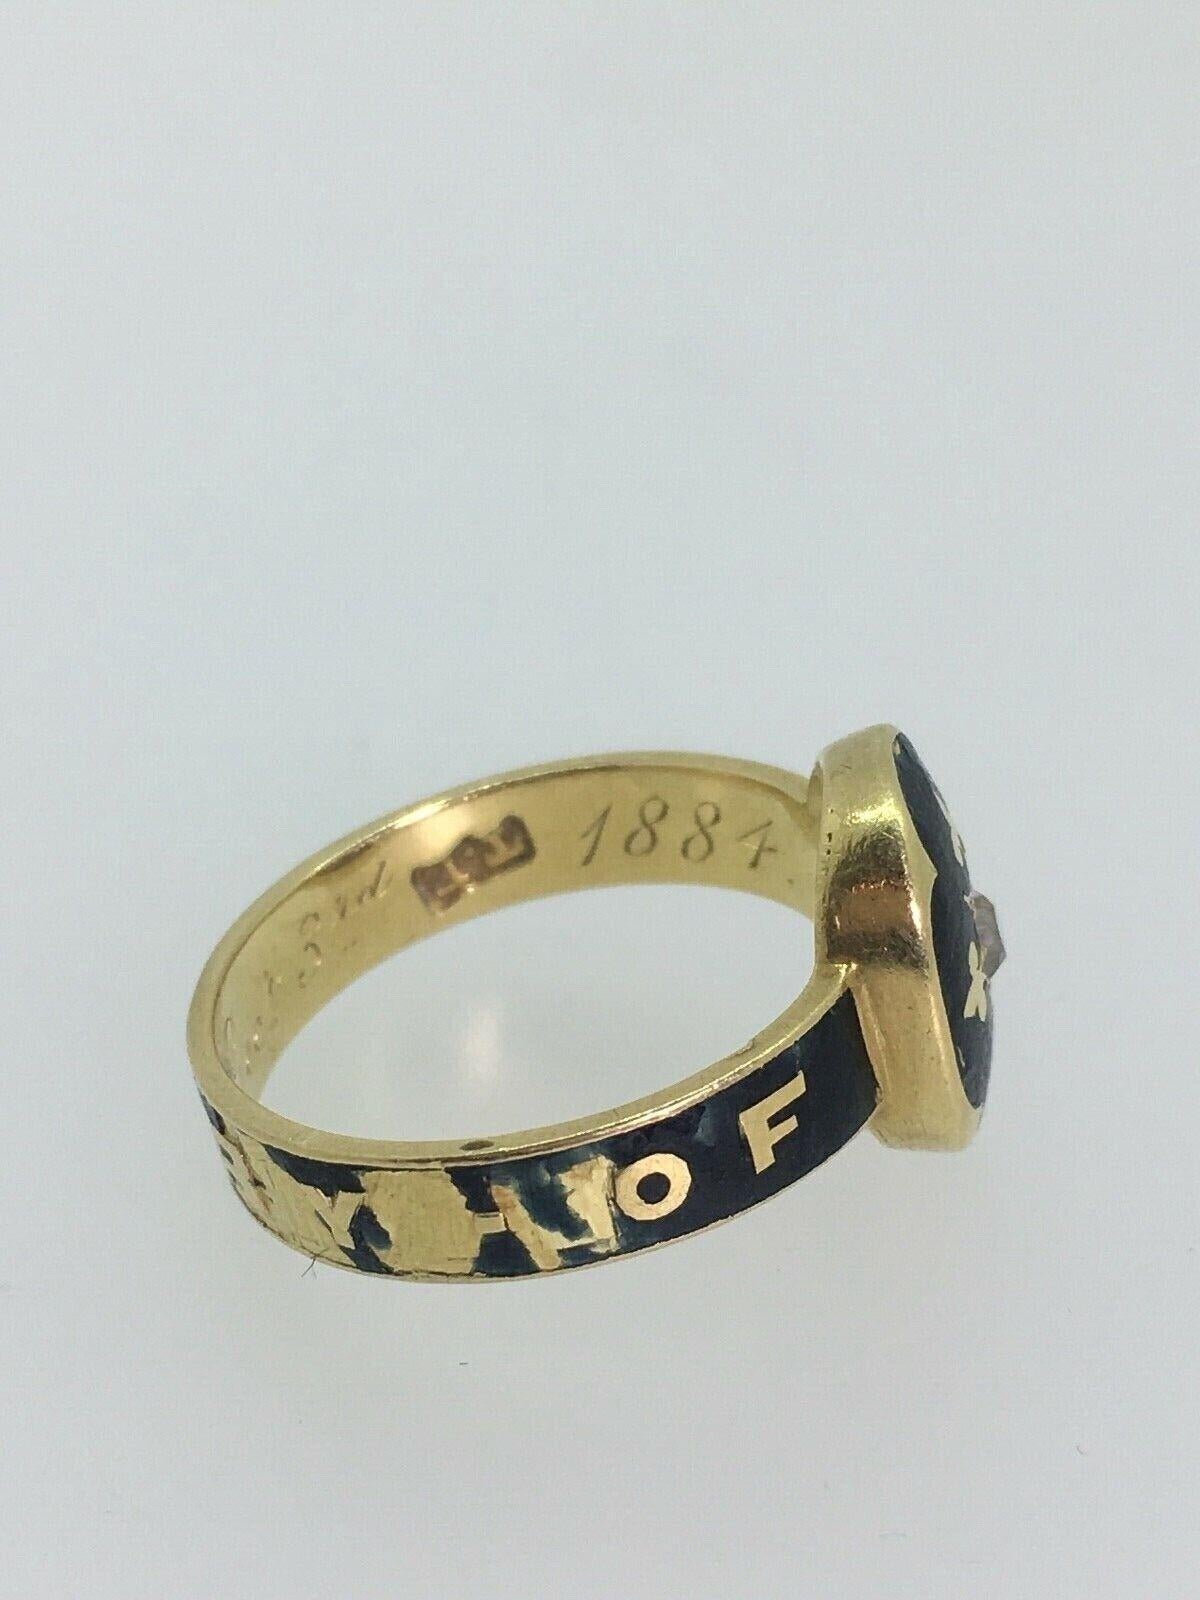 Late Victorian Antique Victorian 18k Gold, Black Enamel & Old Cut Diamond Mourning Ring, C 1884 For Sale